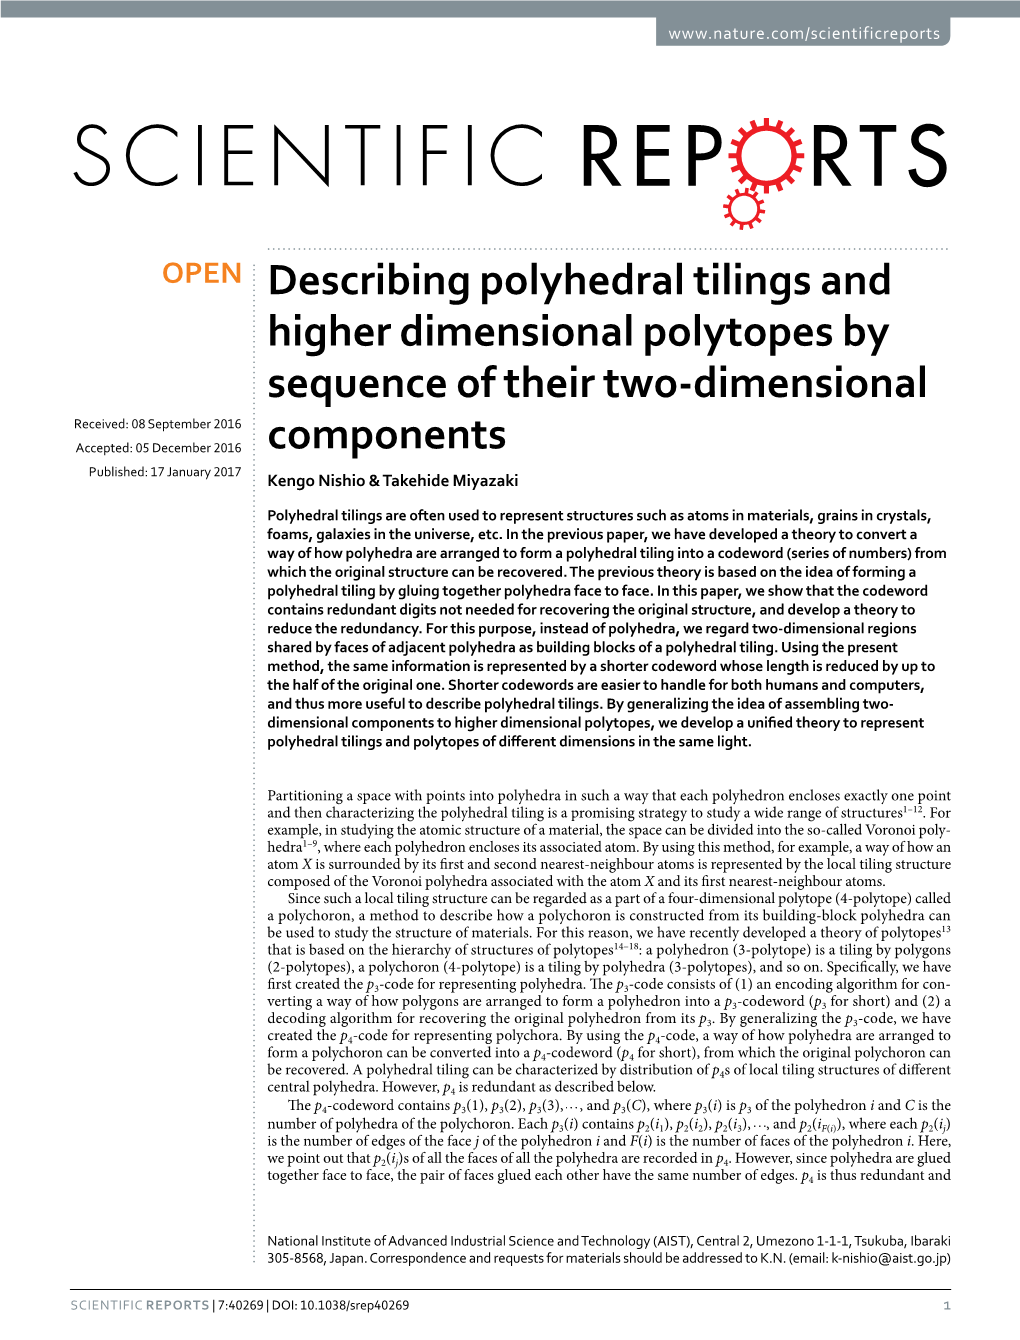 Describing Polyhedral Tilings and Higher Dimensional Polytopes By